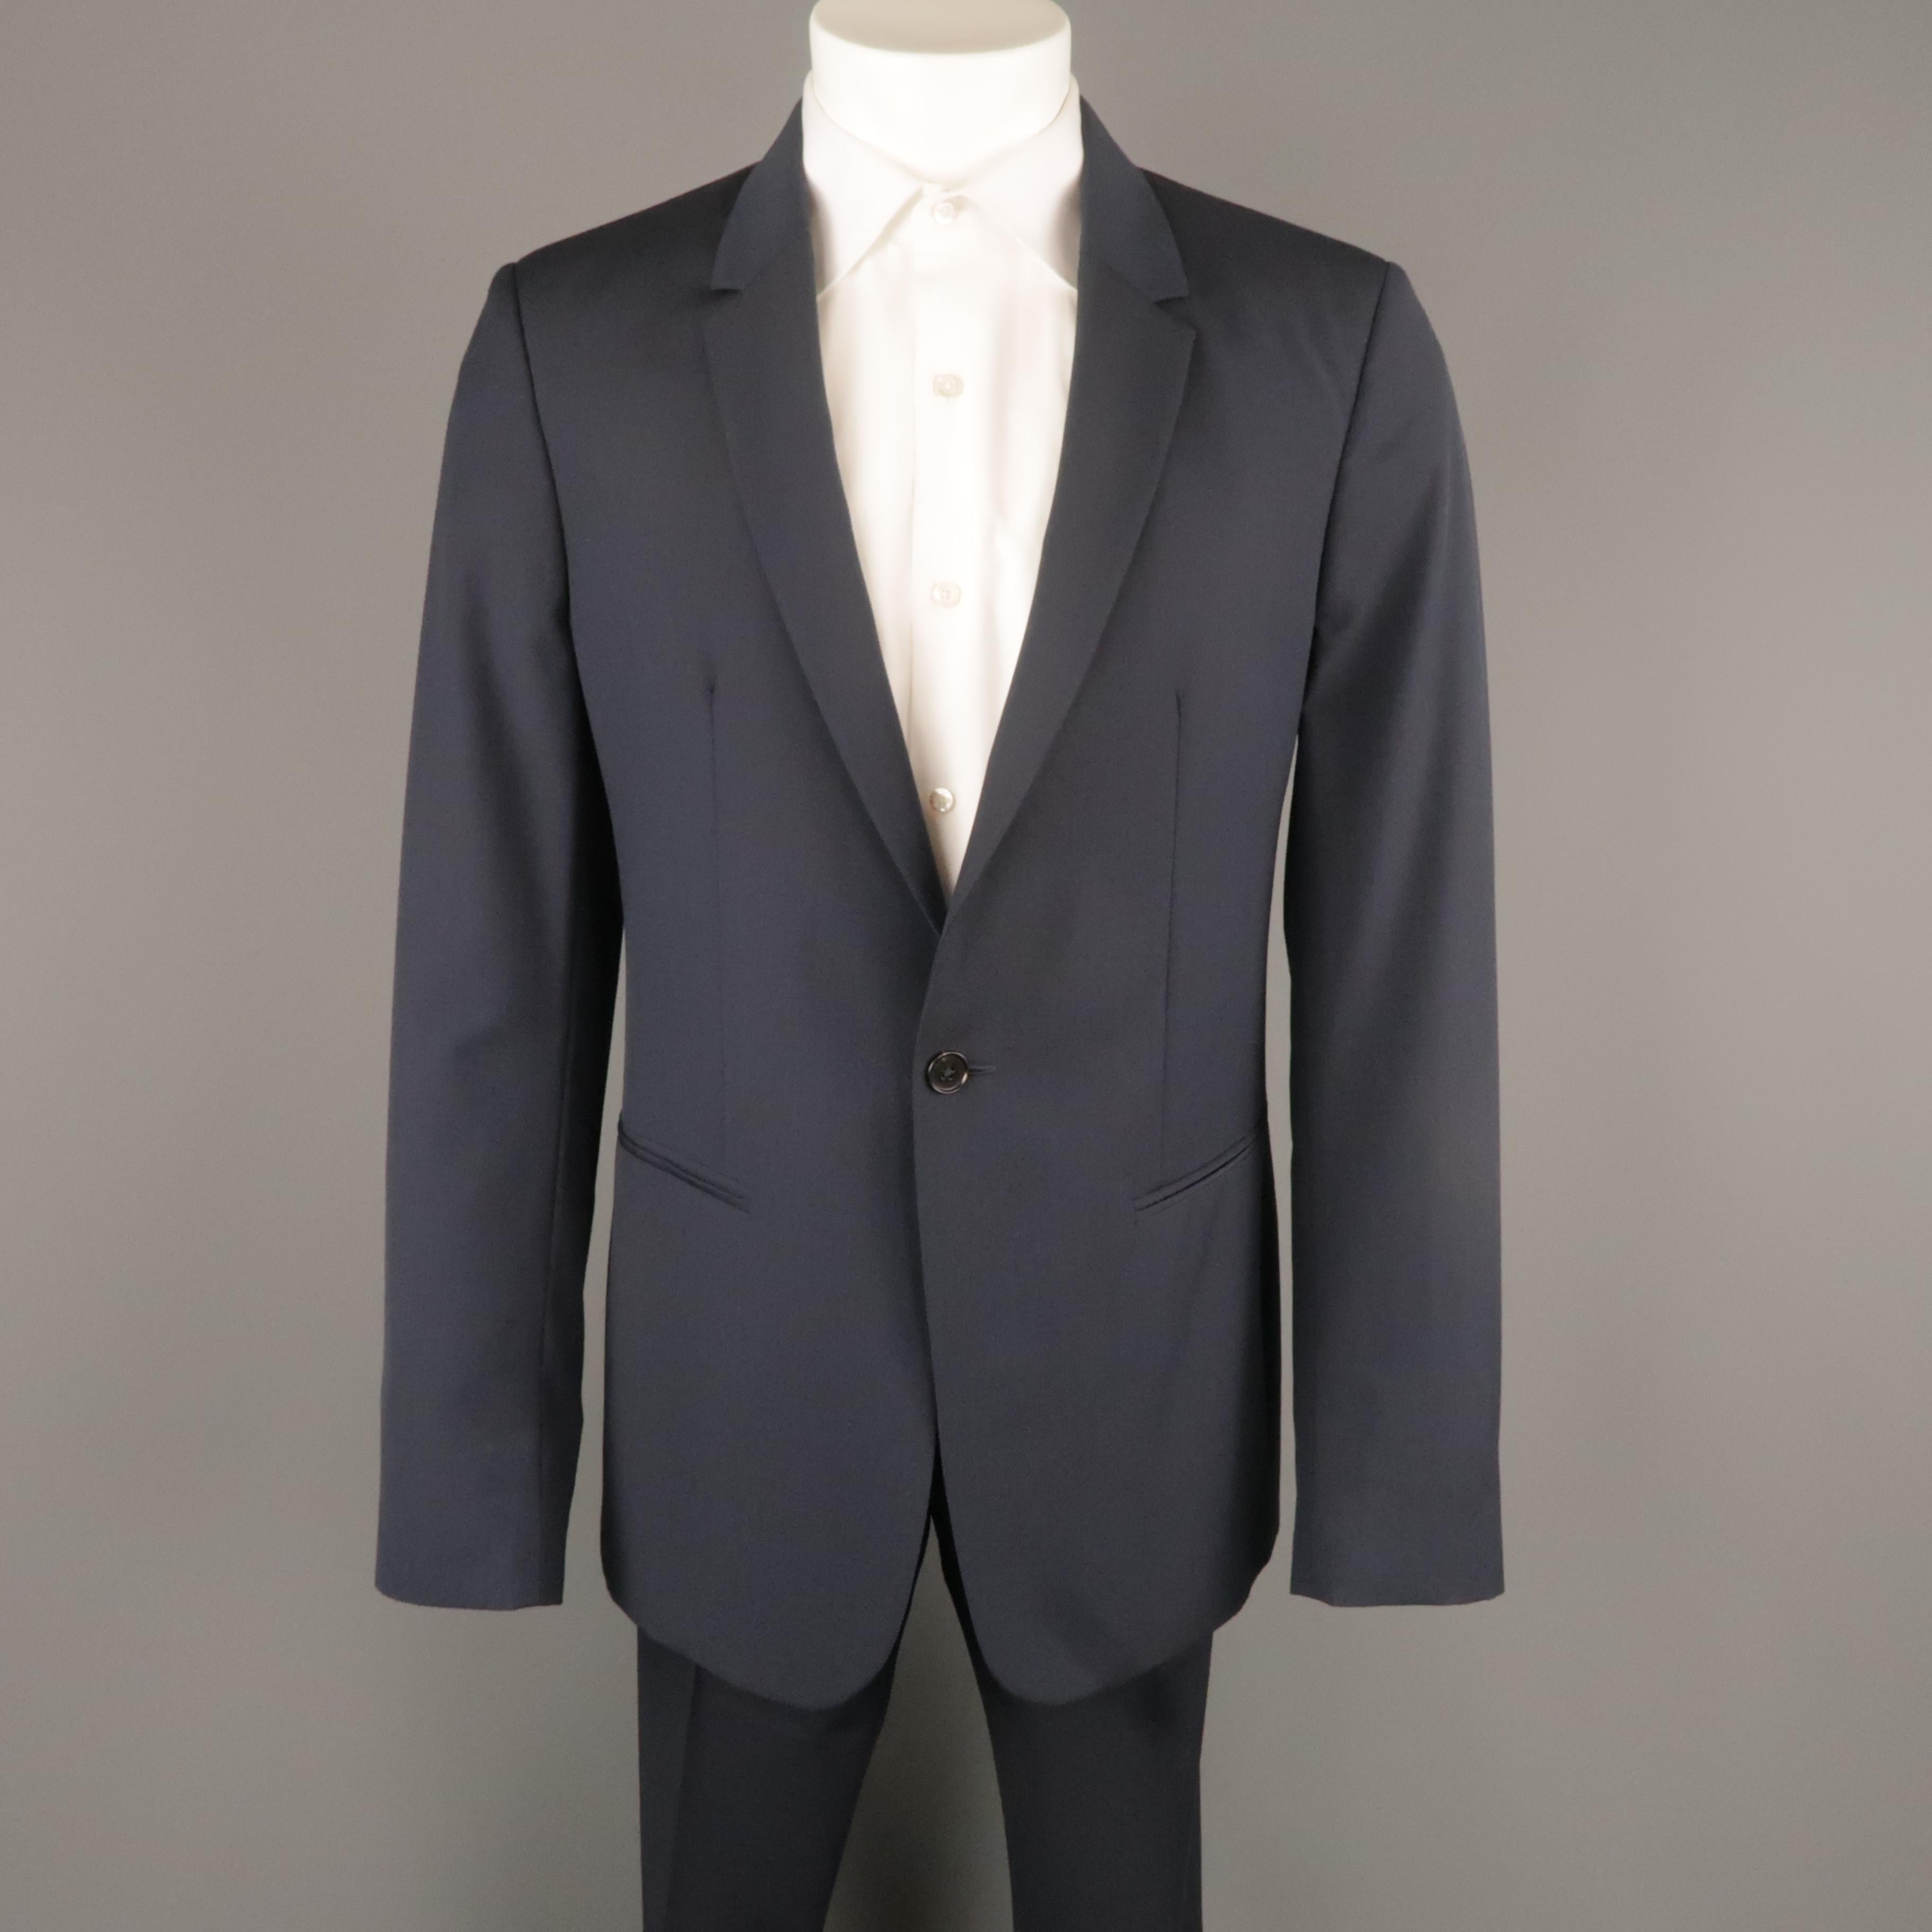 MAISON MARTIN MARGIELA suit comes in navy wool and includes a single breasted,  one button, notch lapel sport coat with mock button cuffs and matching flat front trousers. Made in Italy.
 
Excellent Pre-Owned Condition.
Marked: IT 48
